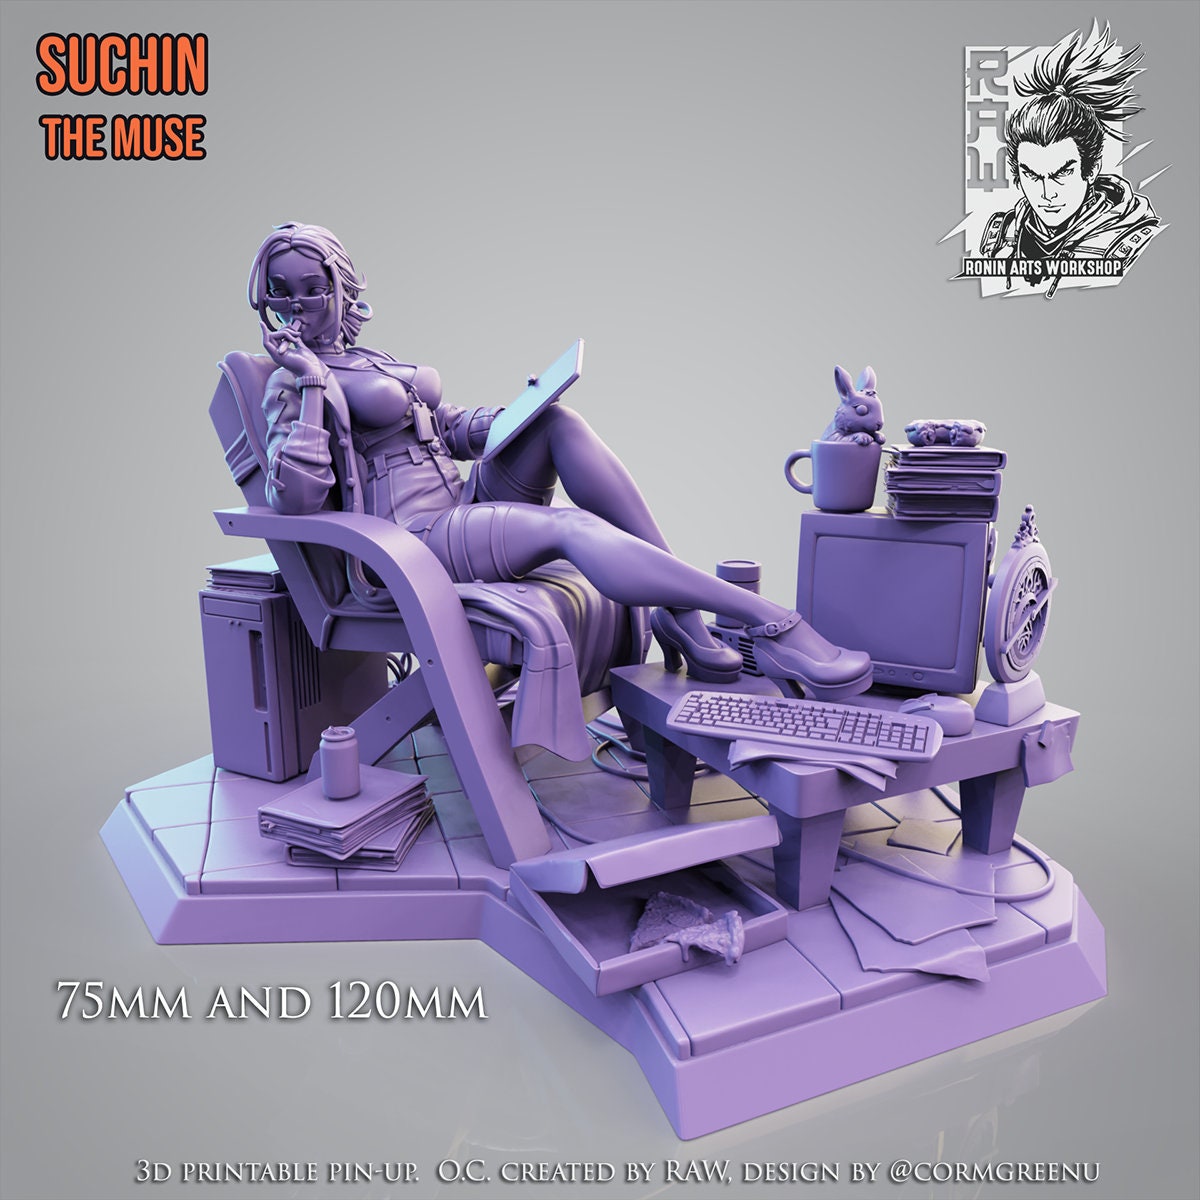 Doctor Suchin | Muse Pinups | Clothed or Nude | Resin 3D Printed Pinup | Ronin Arts Workshop